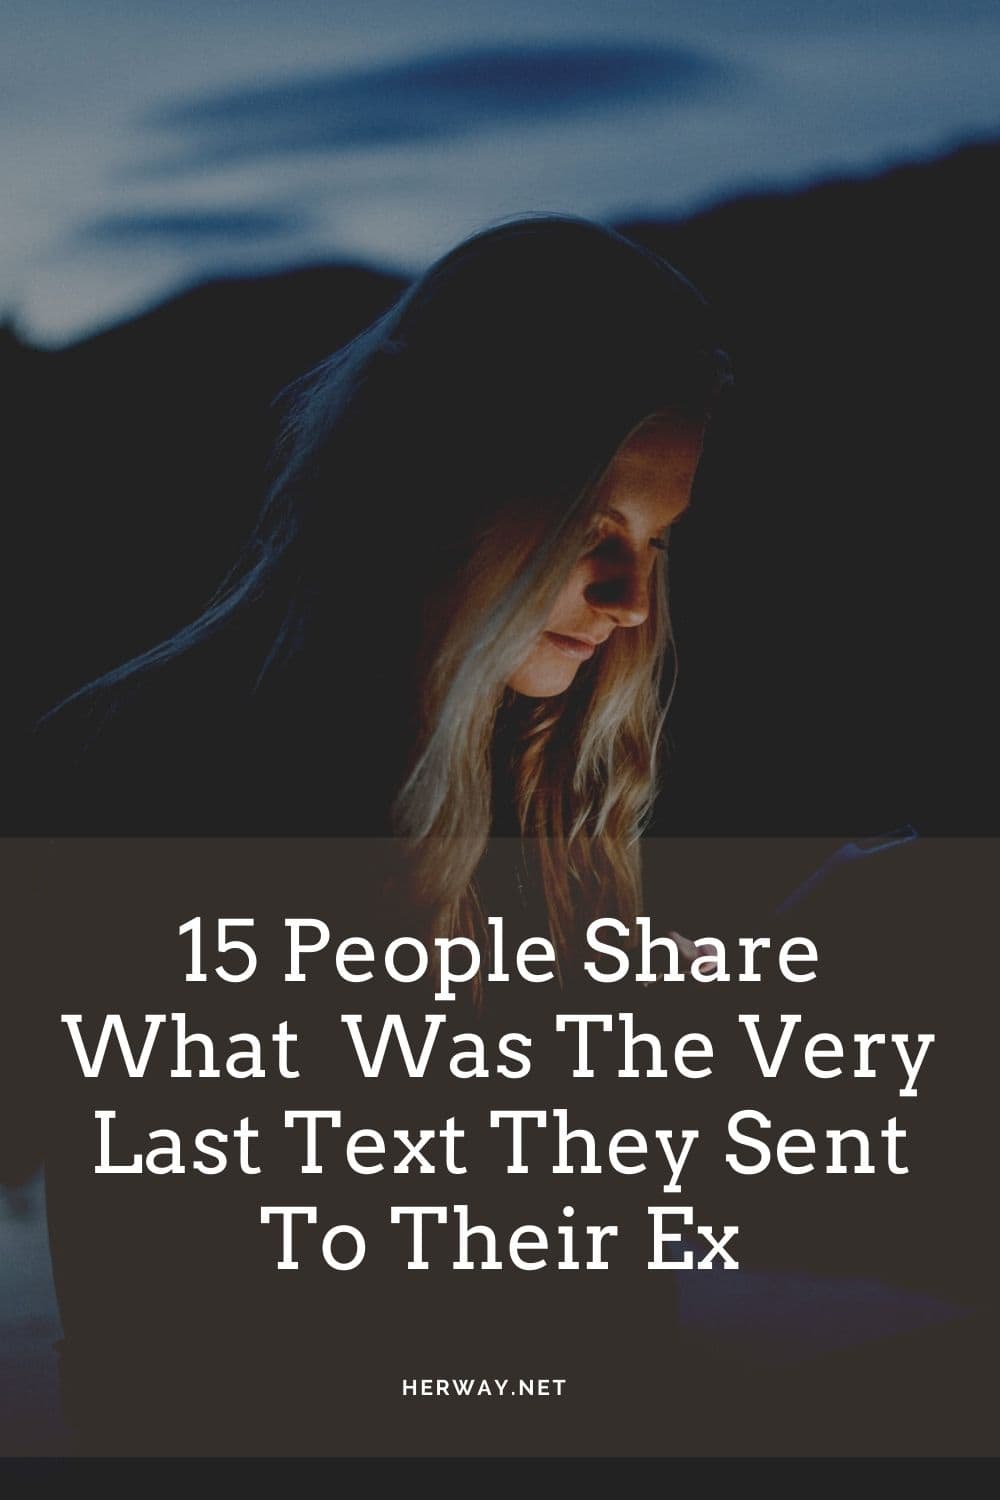 15 People Share What Was The Very Last Text They Sent To Their Ex